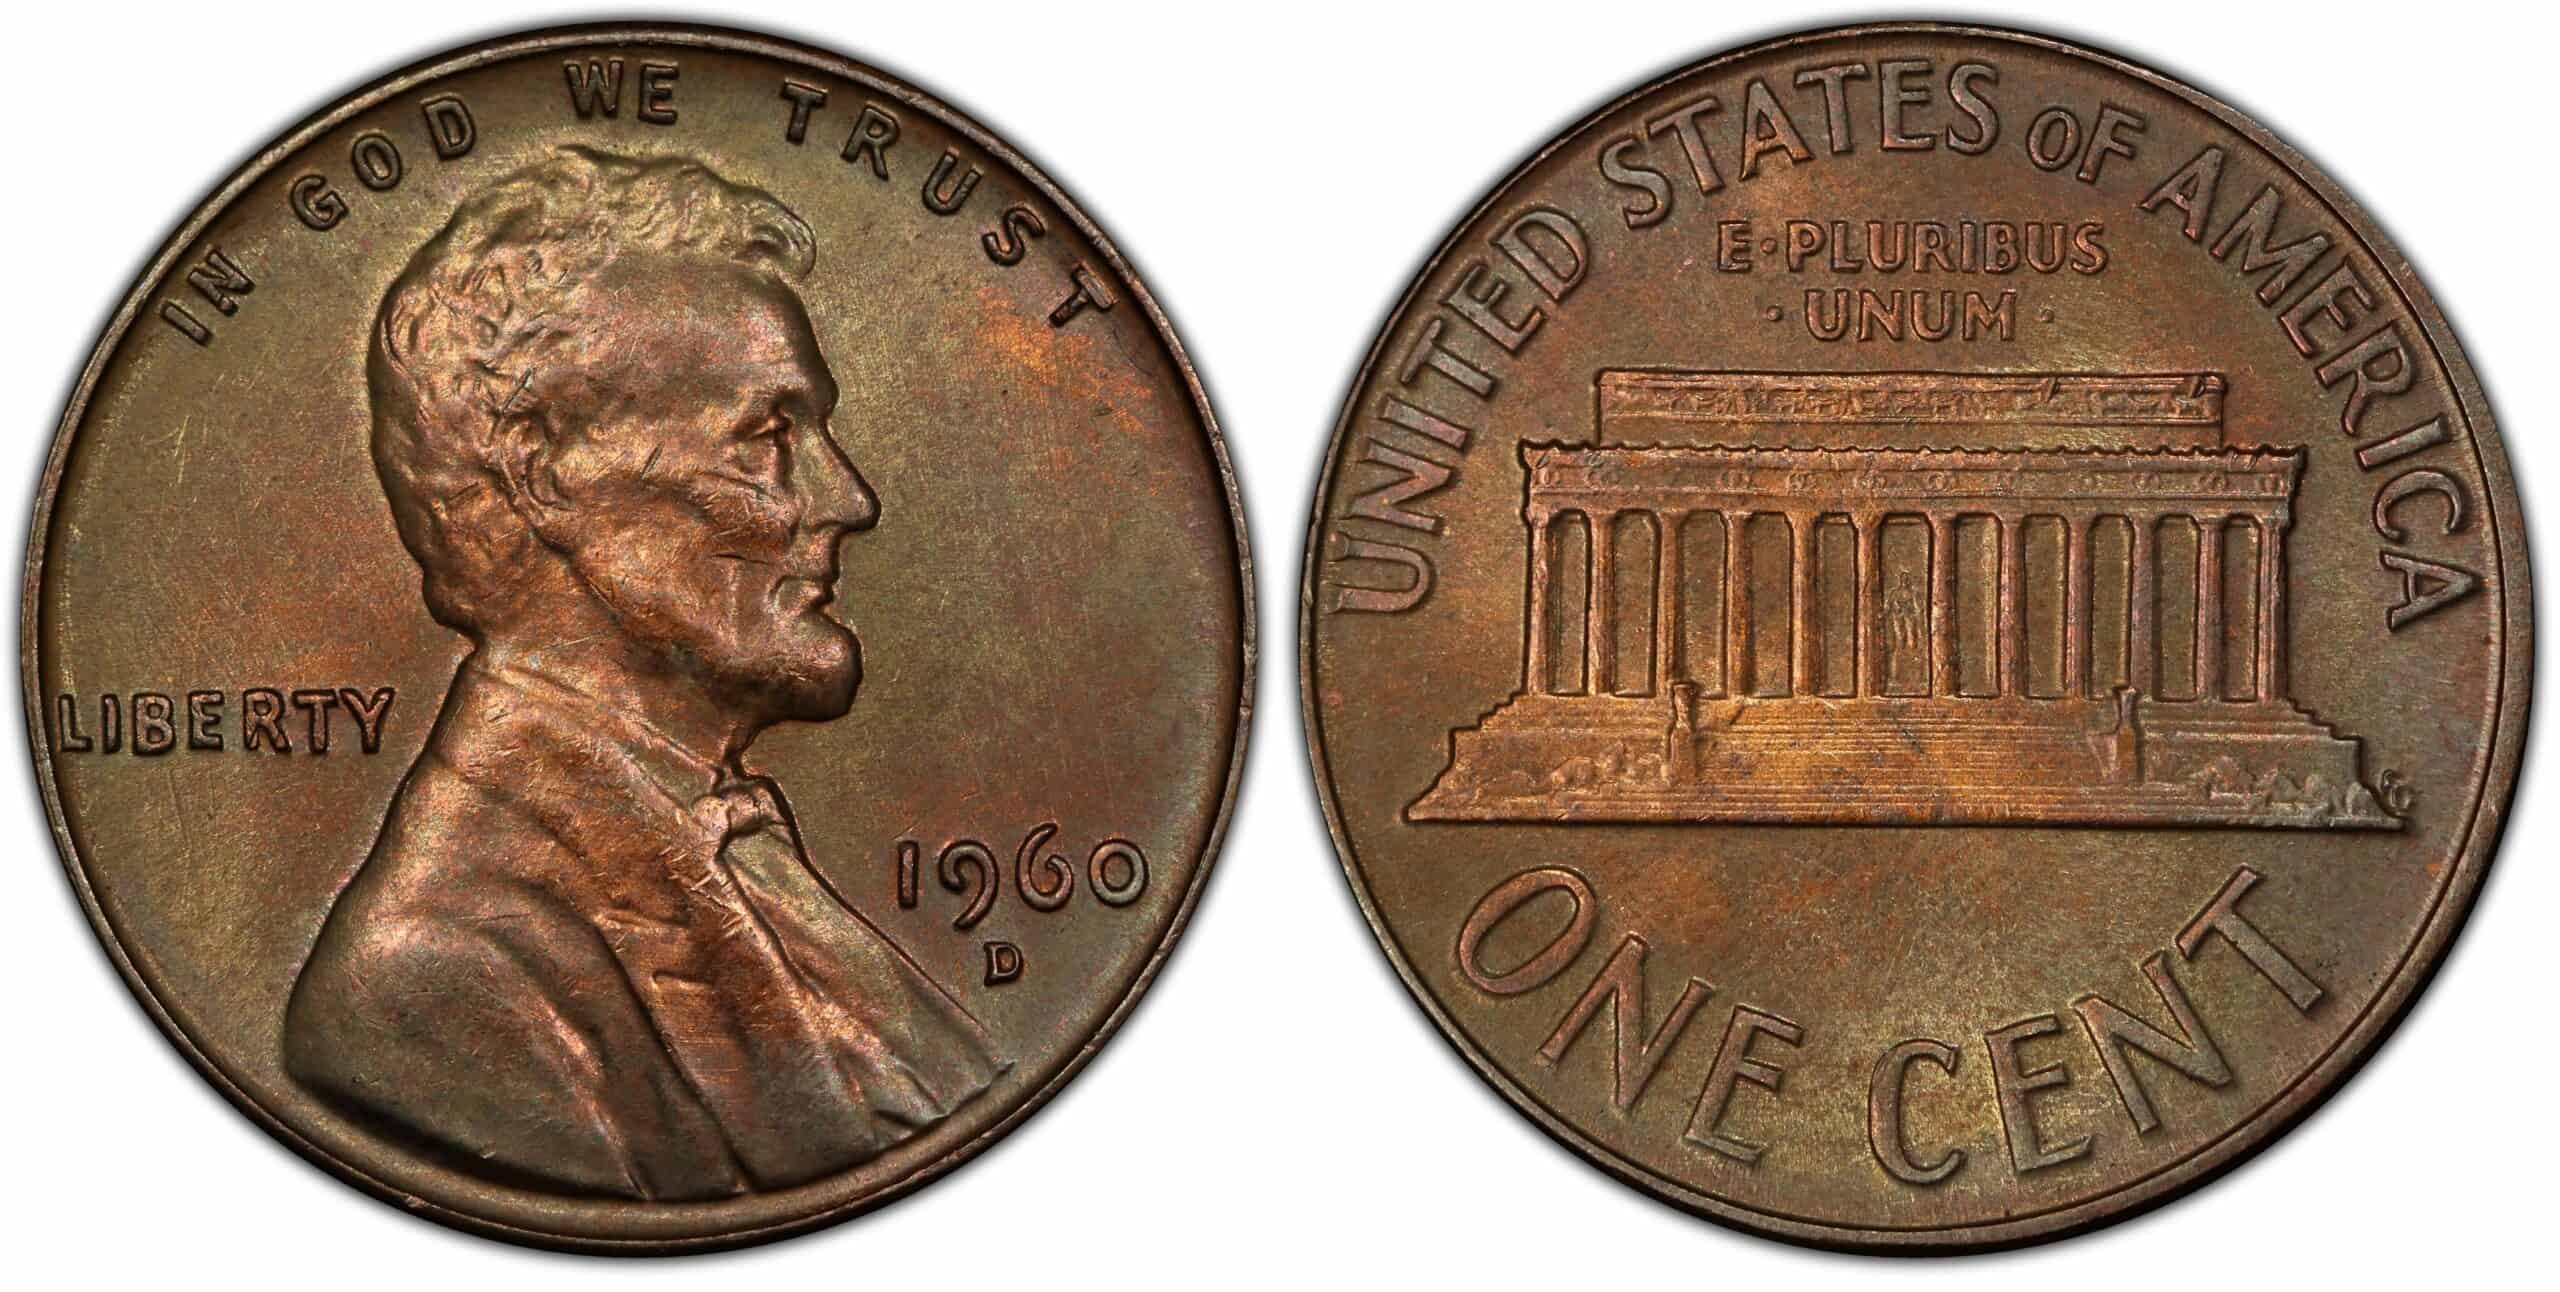 1960 D Small Date Penny Value